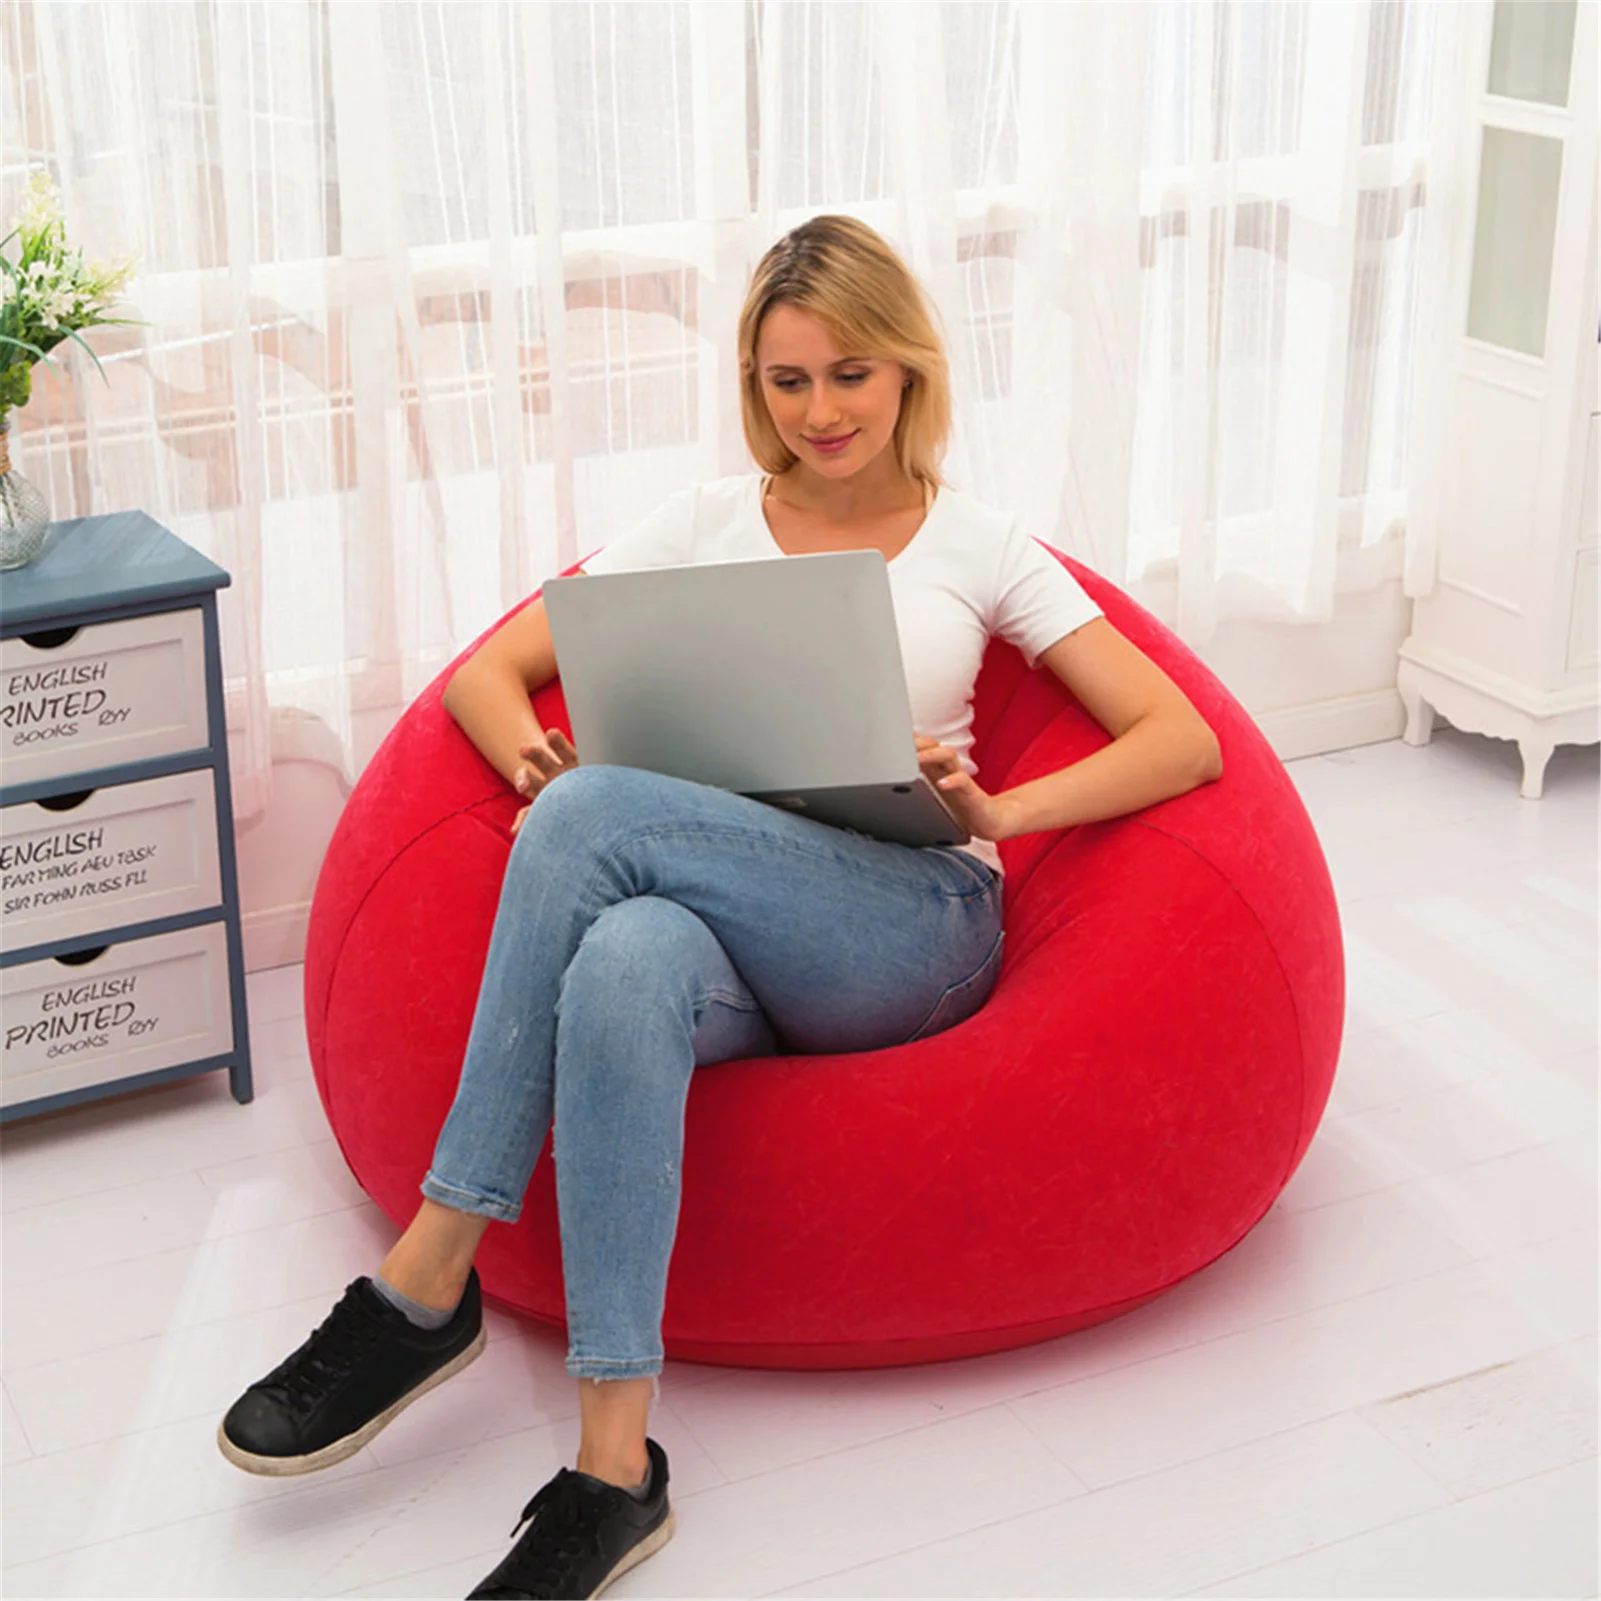 Soft Comfy Flocking Air Chair Blow Up Bean Bag Couch for Adults Kids bulrusely Beanless Bag Chair 